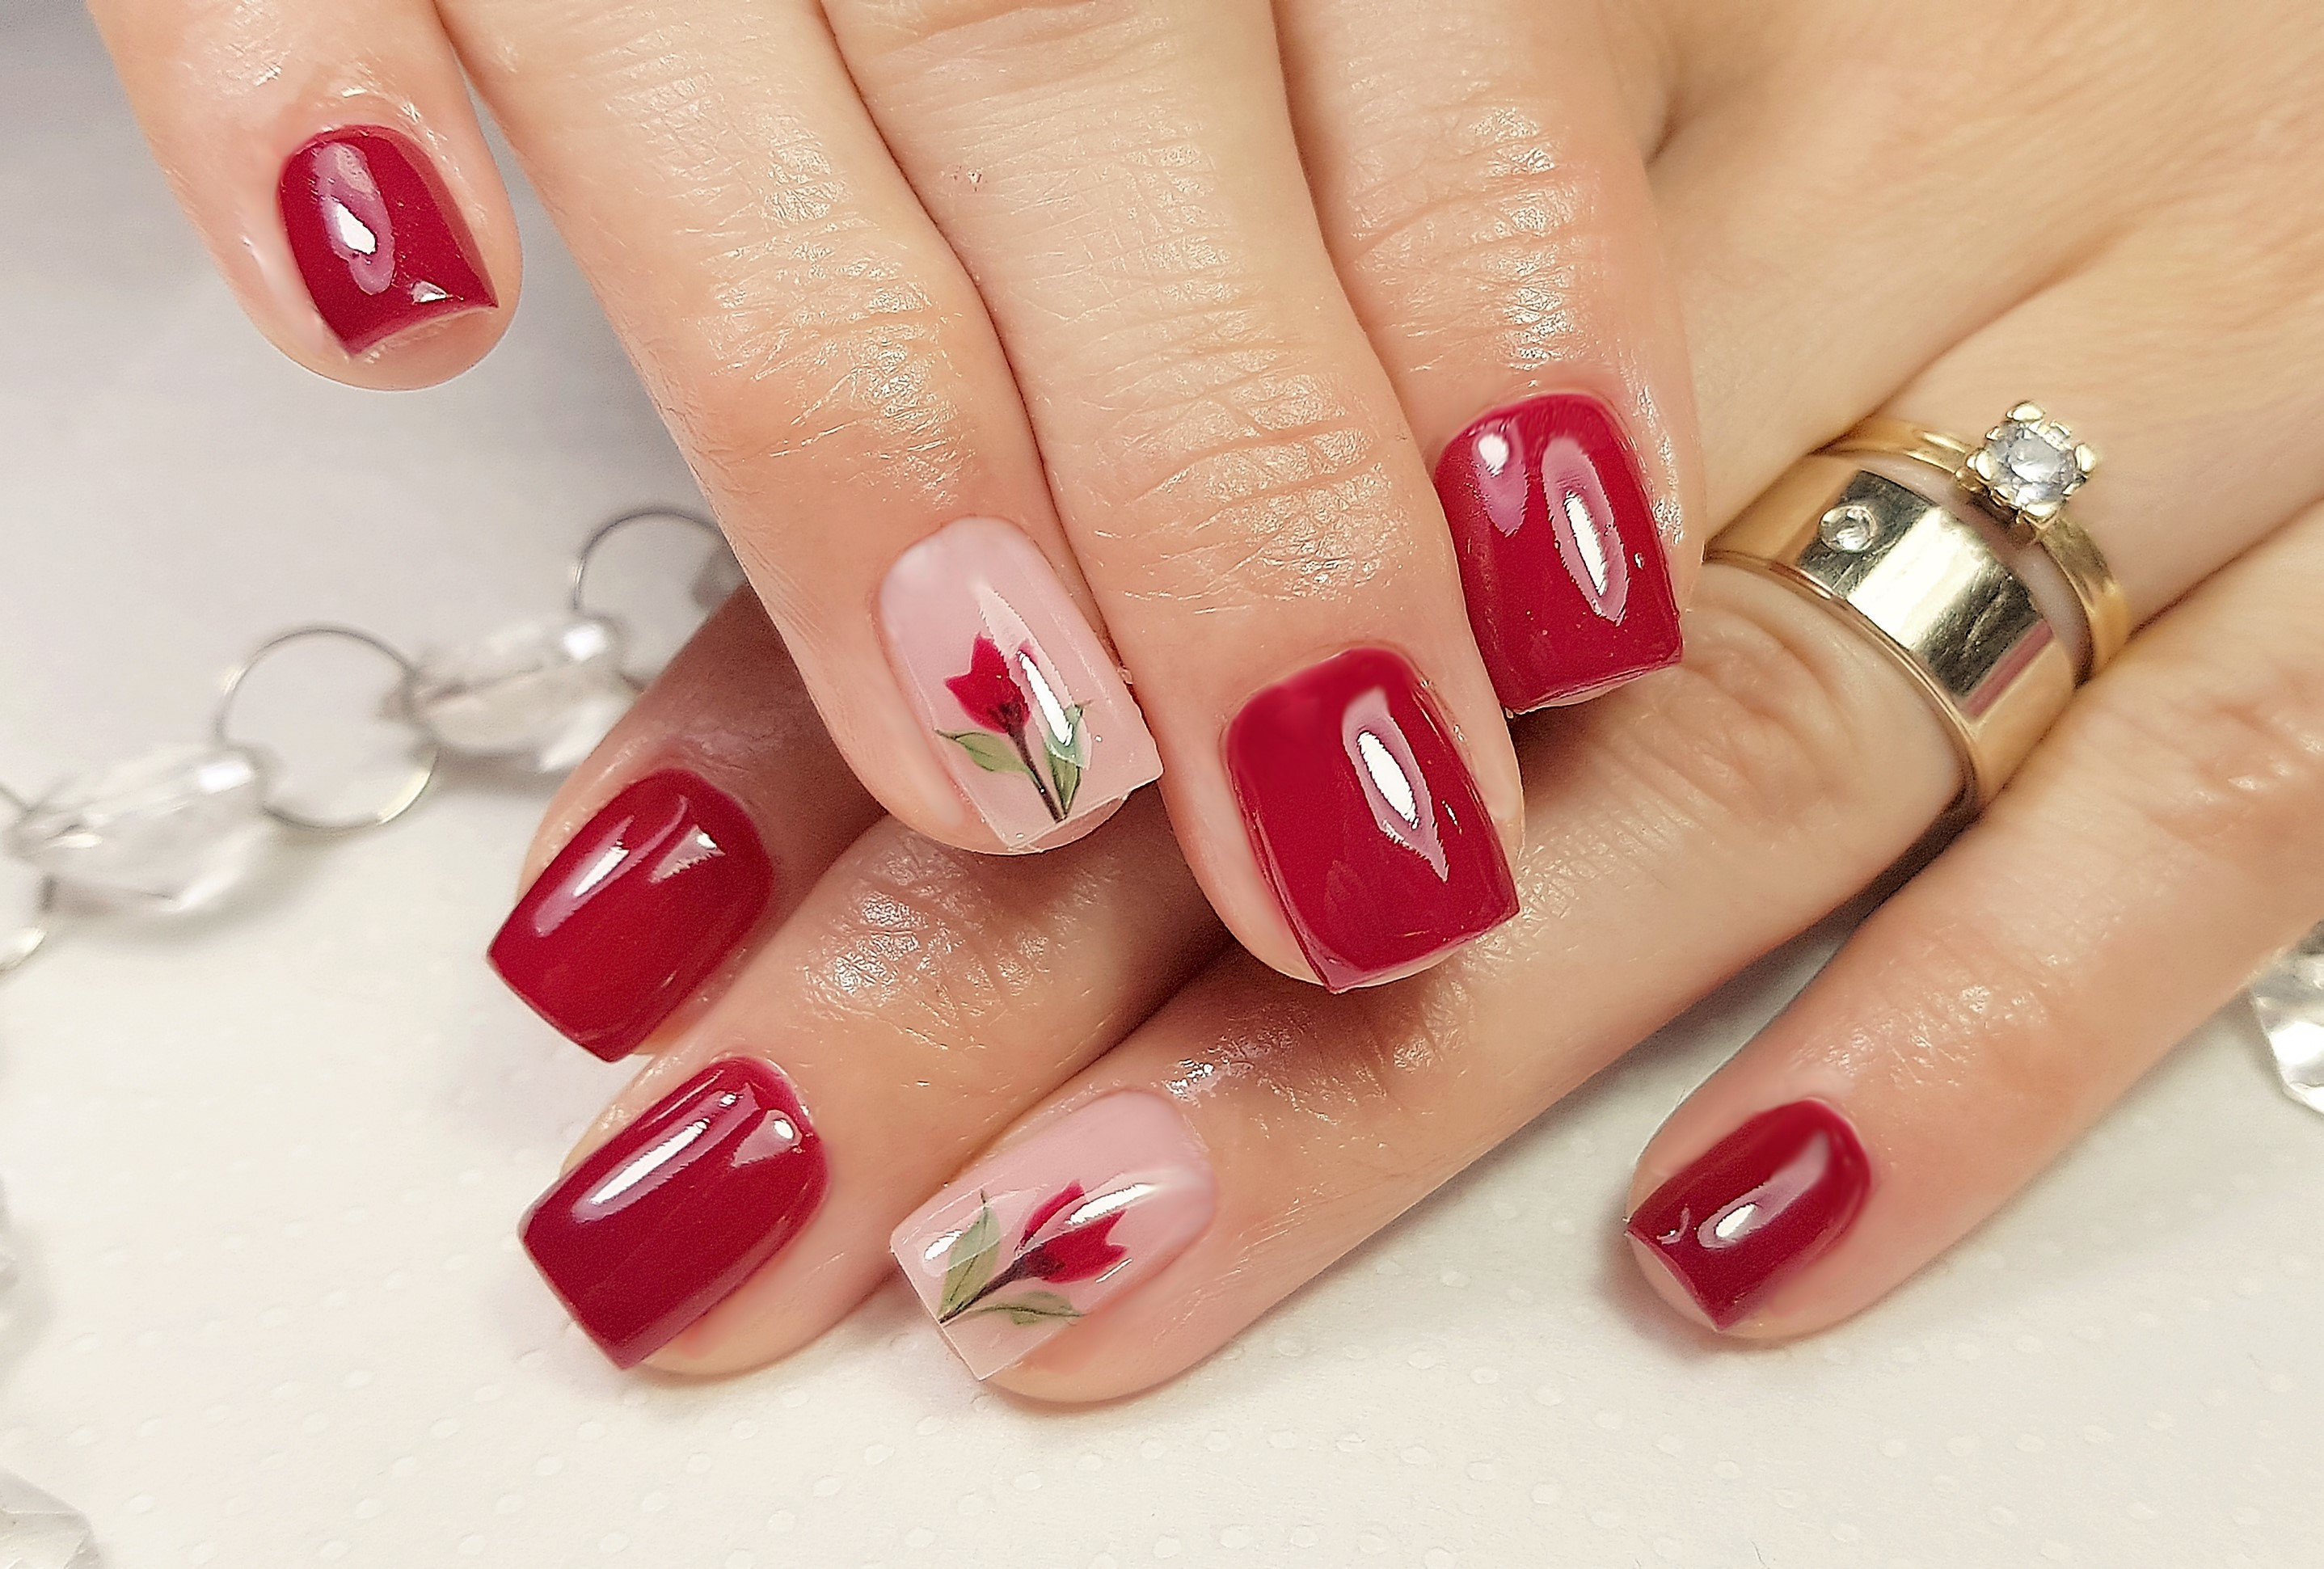 30 Red Nail Designs To Try - The Nail Tech Org